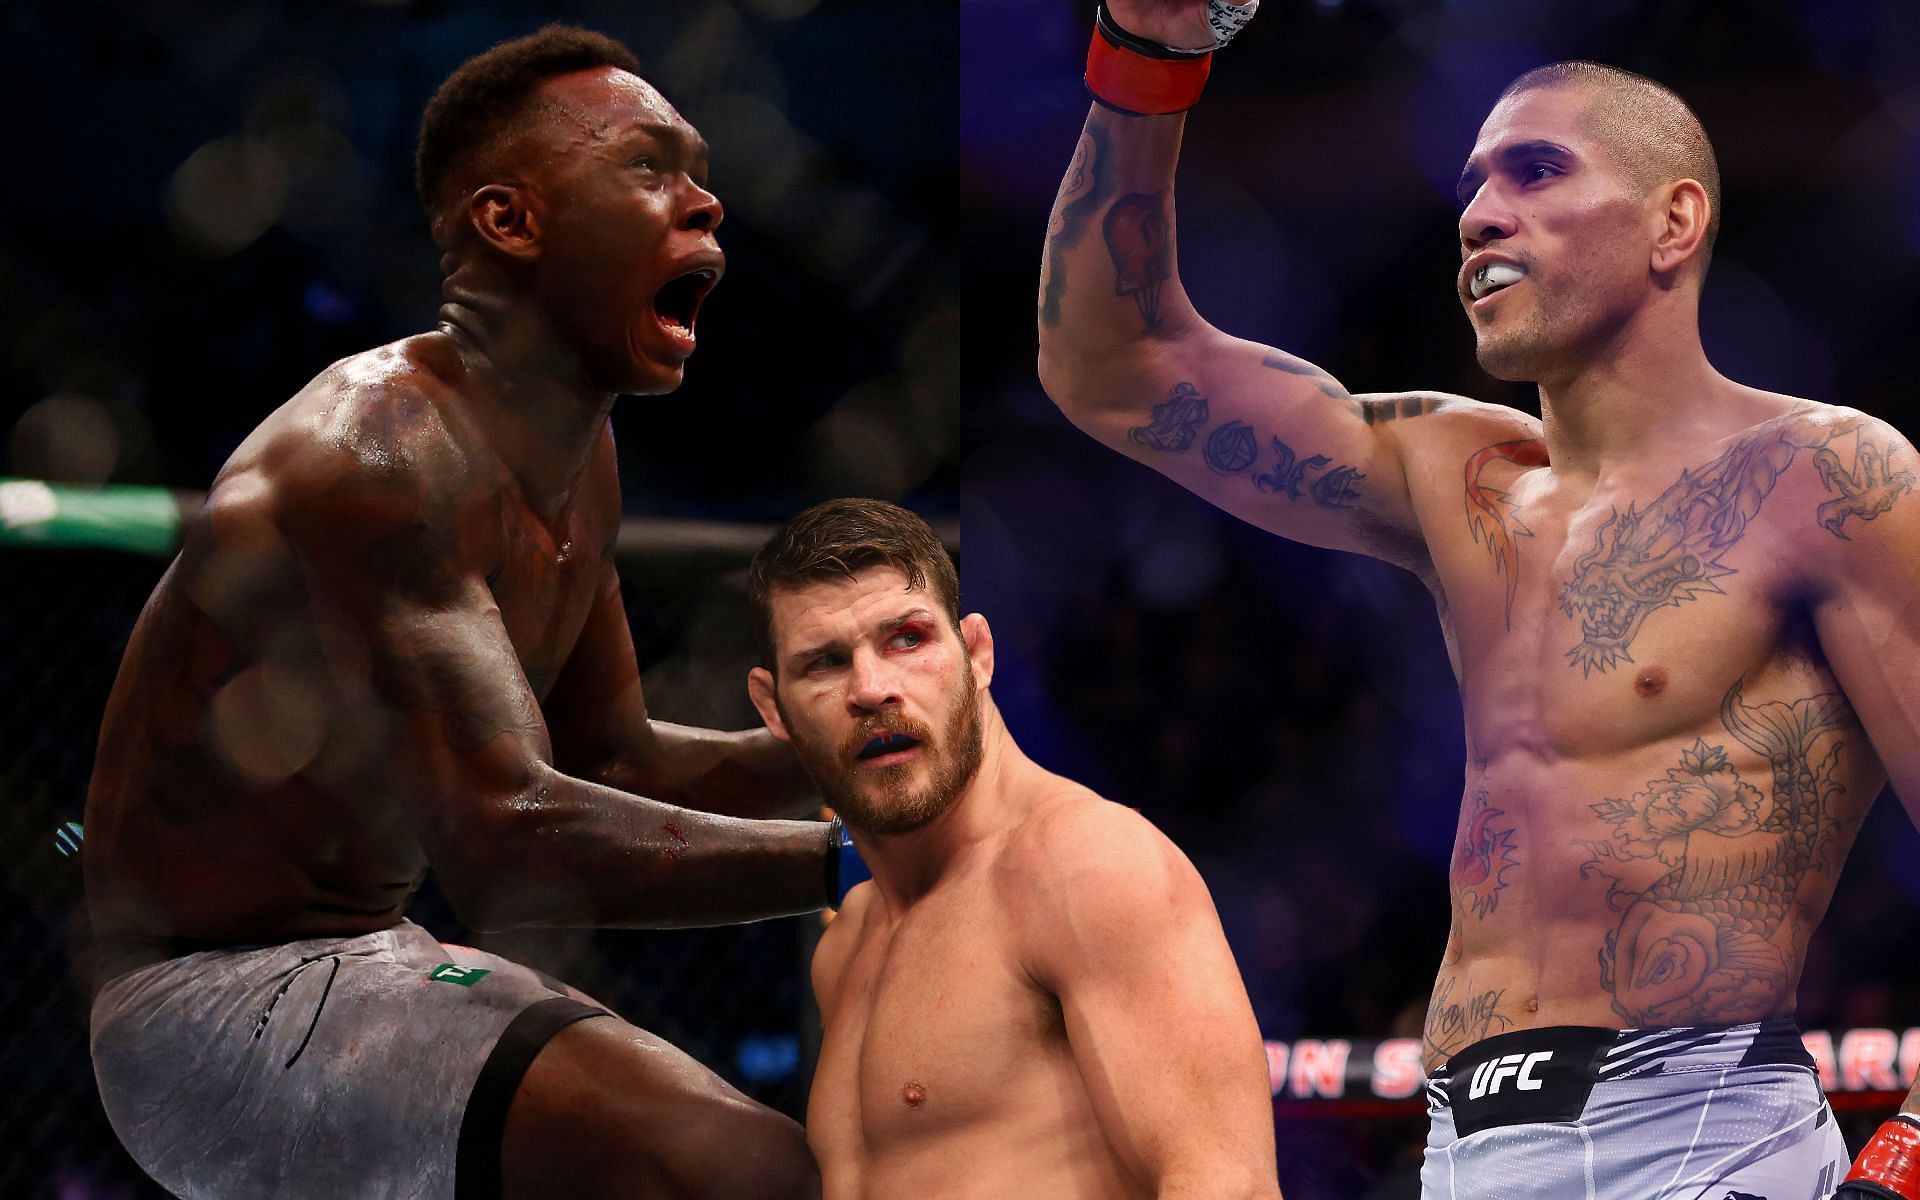 Israel Adesanya (left), Michael Bisping (center), Alex Pereira (right) (Images via Getty)